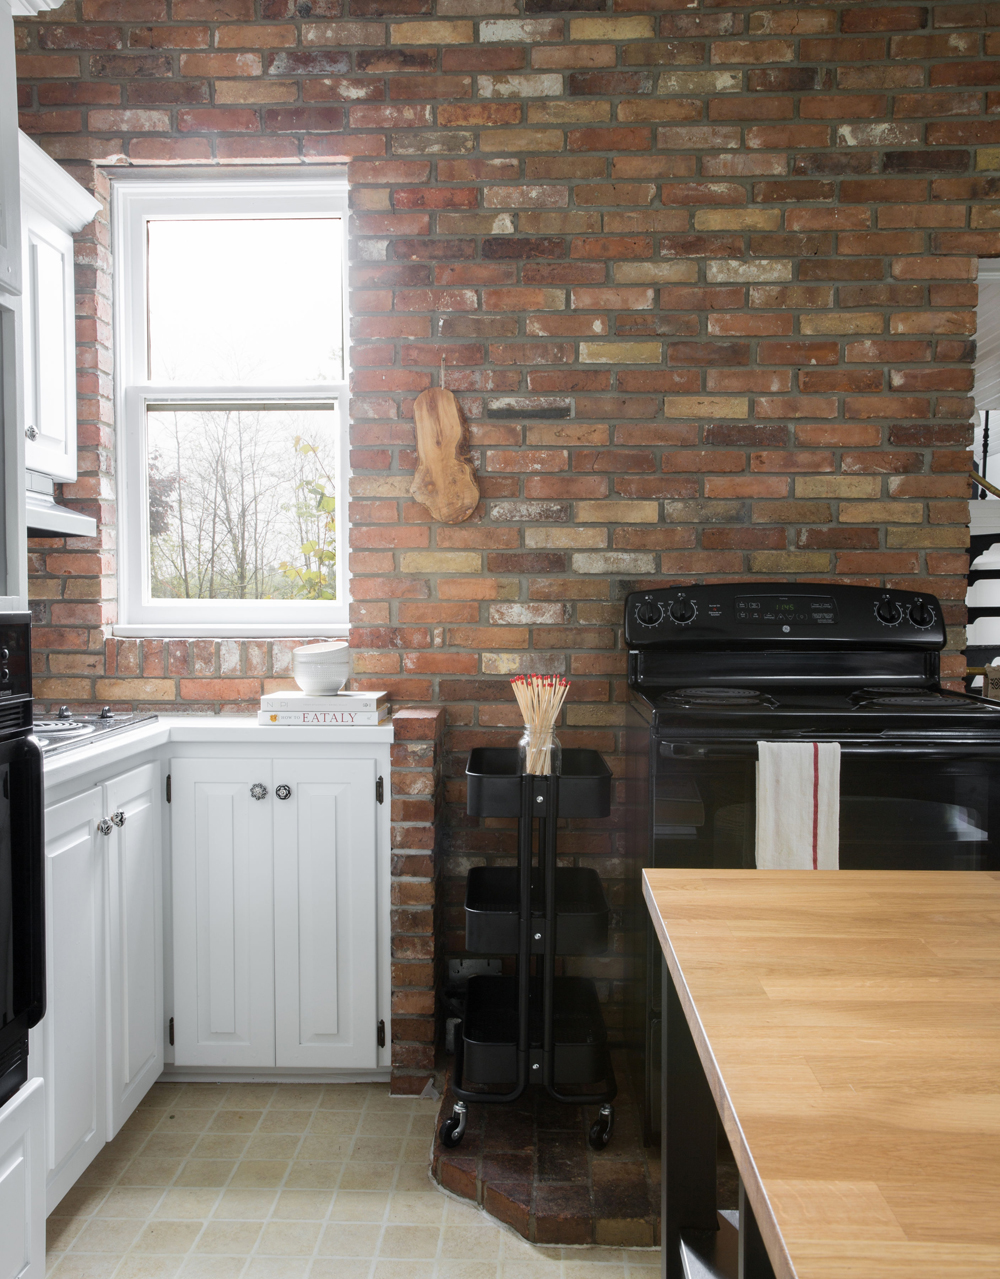 The exposed brick wall in the all-white kitchen lends the space a country-home vibe